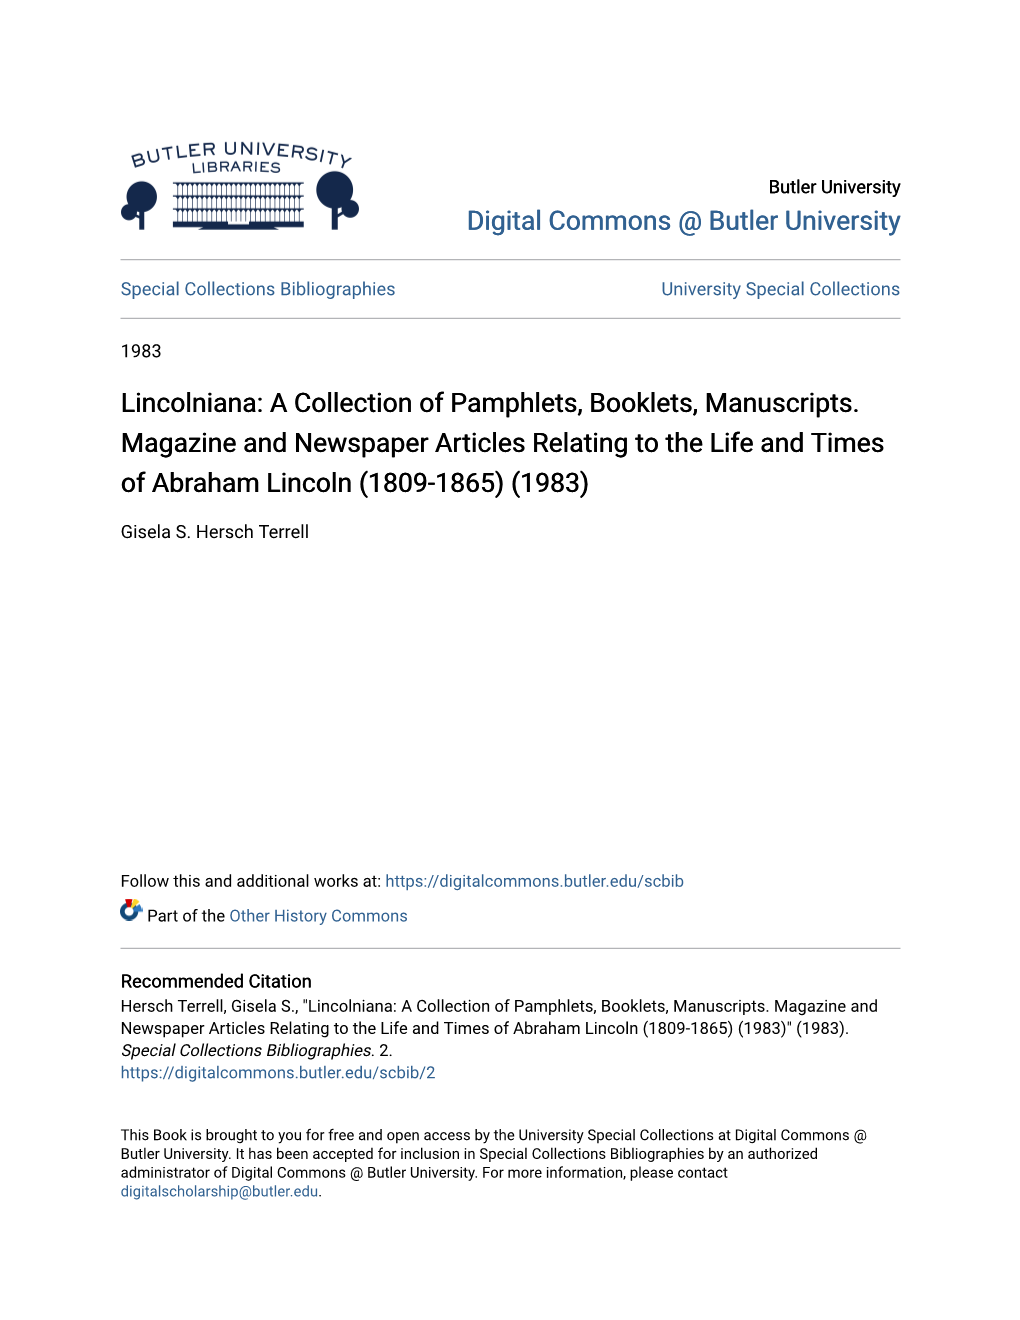 Lincolniana: a Collection of Pamphlets, Booklets, Manuscripts